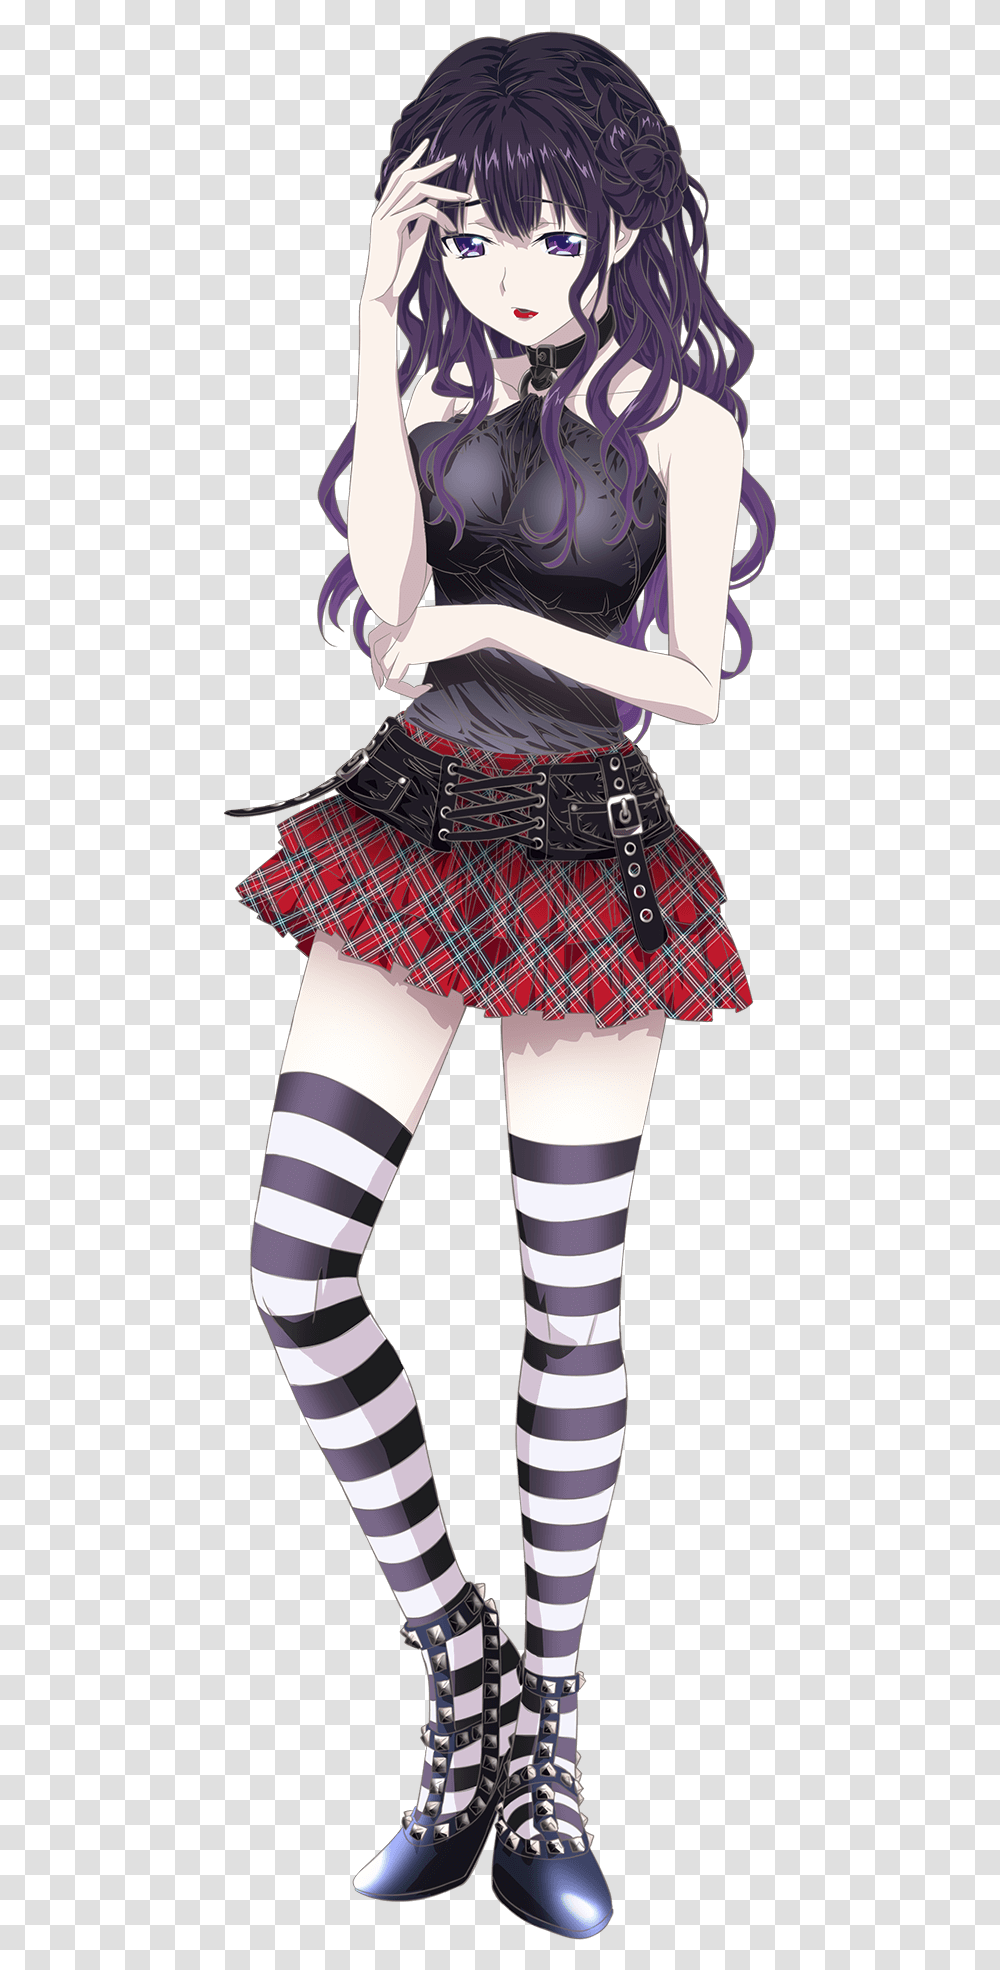 Anime Hand Shakers Characters Anime Hand Shakers Bind, Apparel, Skirt, Person Transparent Png